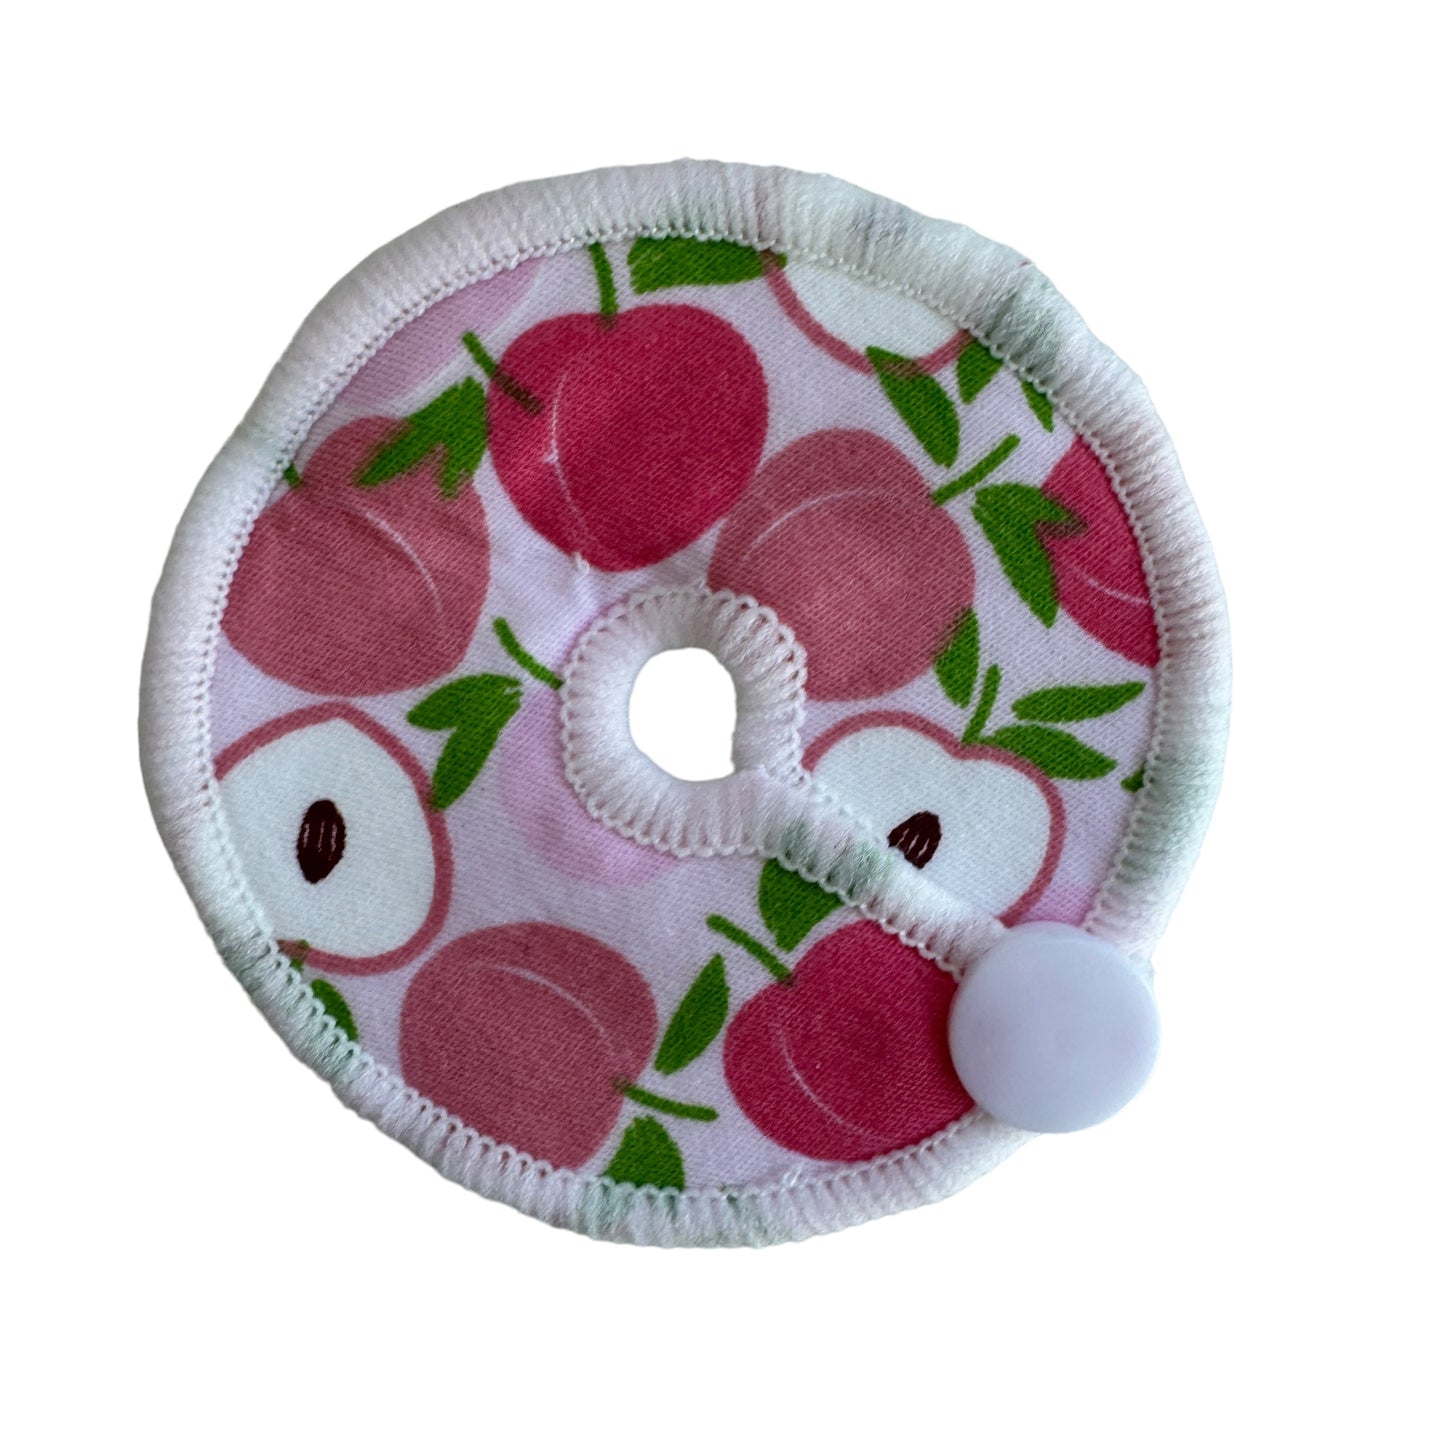 Tubie Pads — Pattered, Assorted.